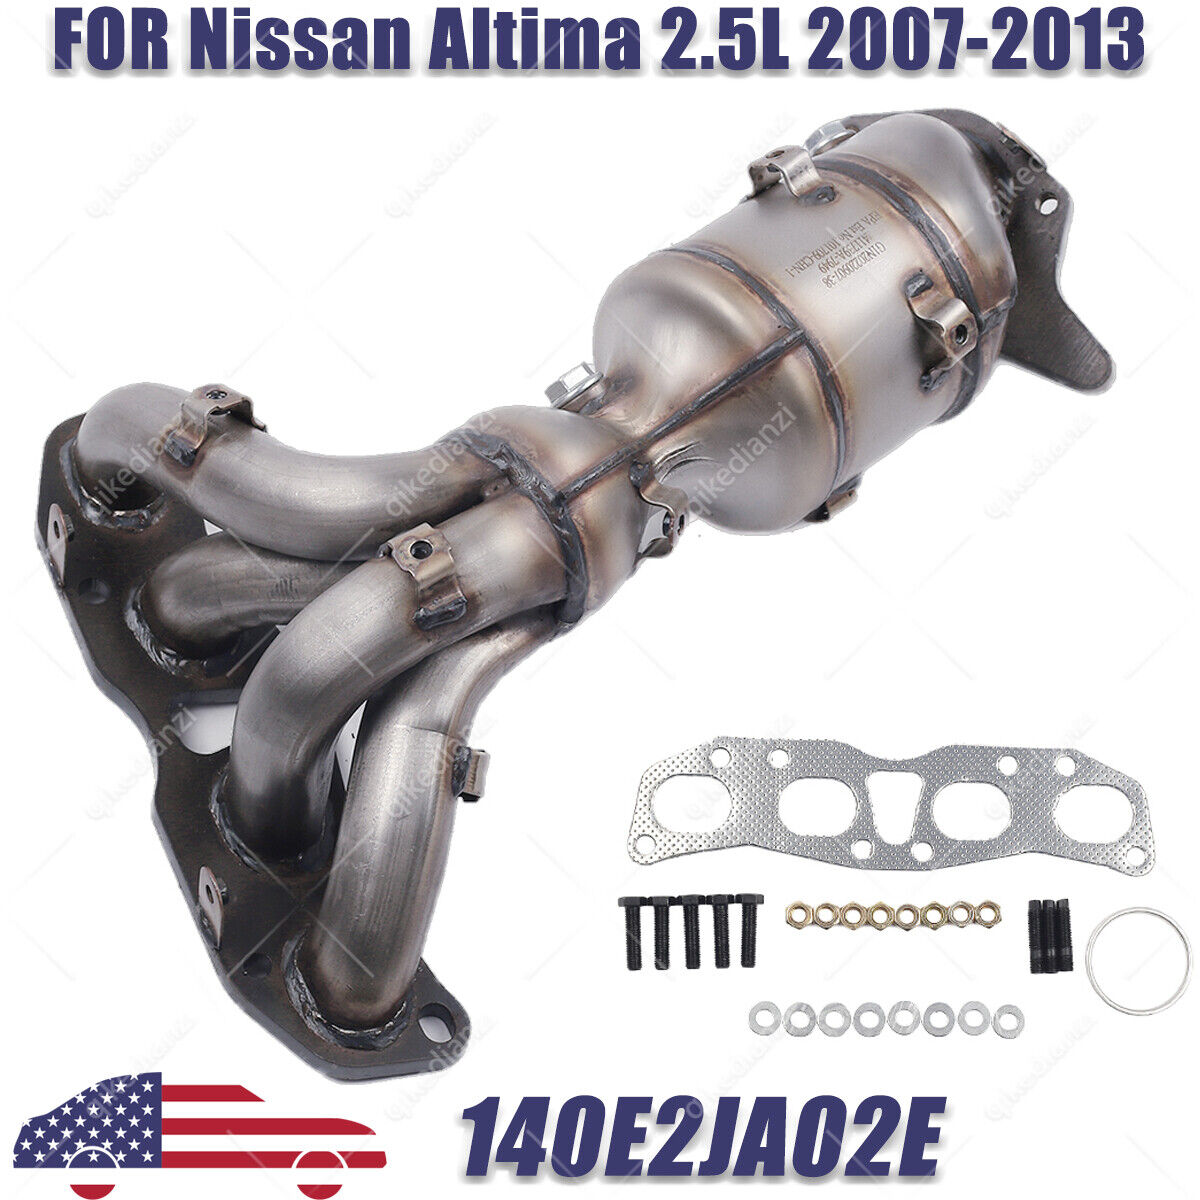 For Nissan Altima 2.5L 2007 2008 2009 2010 2012 2013 Catalytic Converter